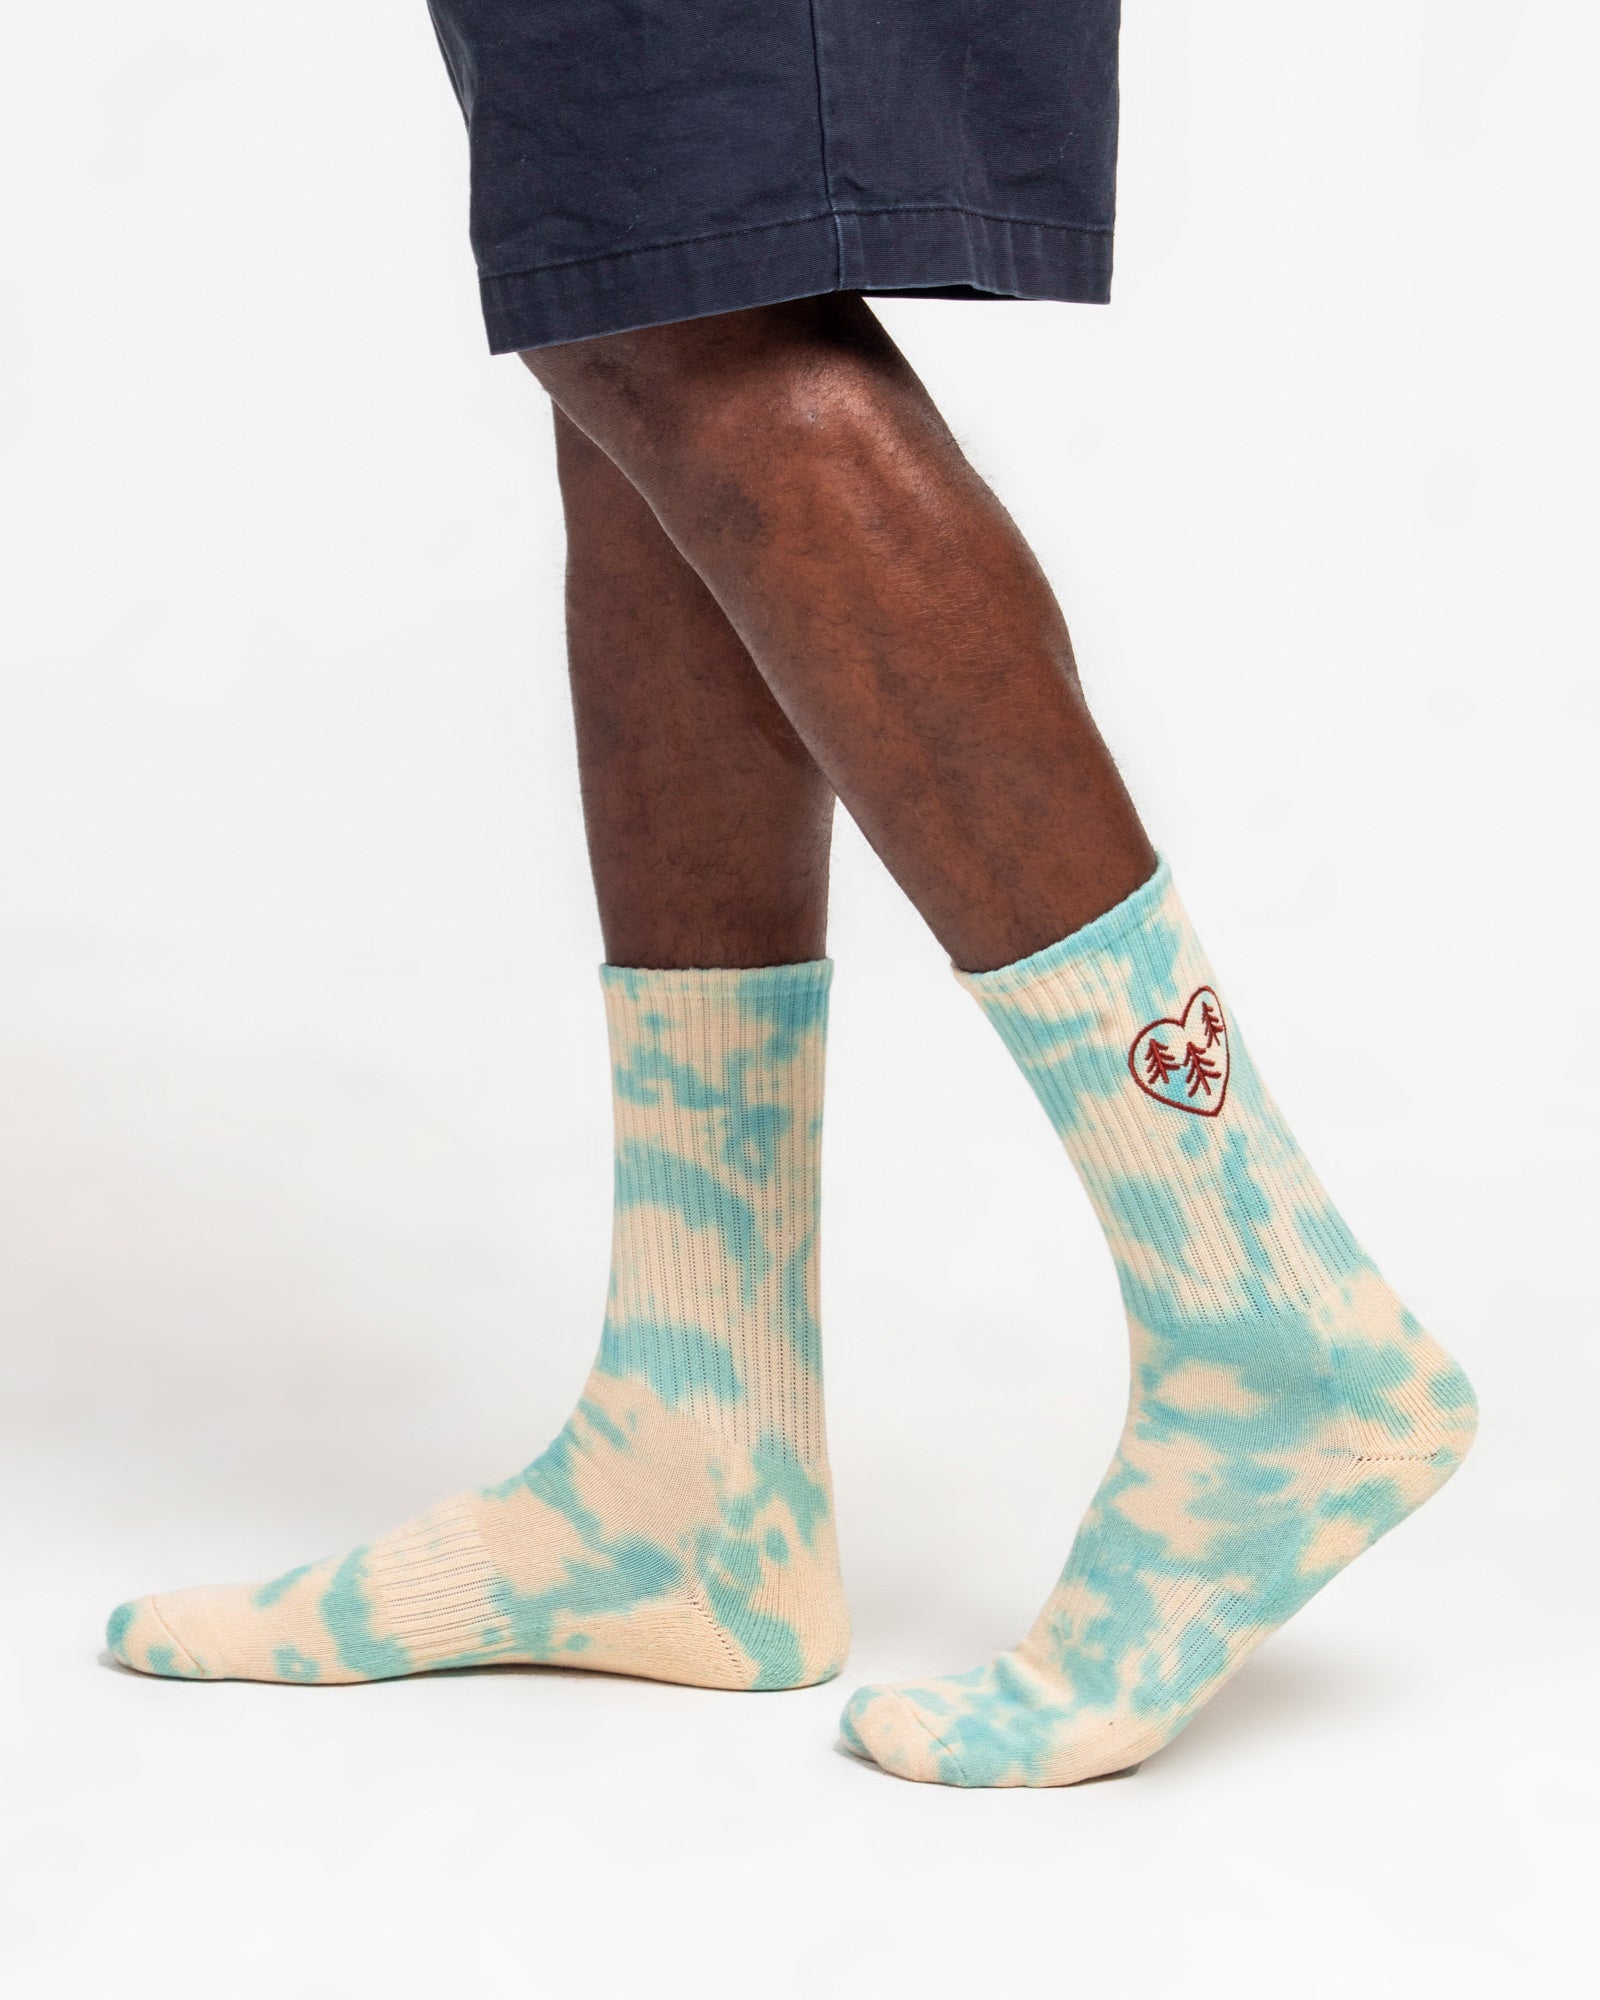 Step Into Nature with Tree Hugger Tie Dye Organic Socks – Parks Project